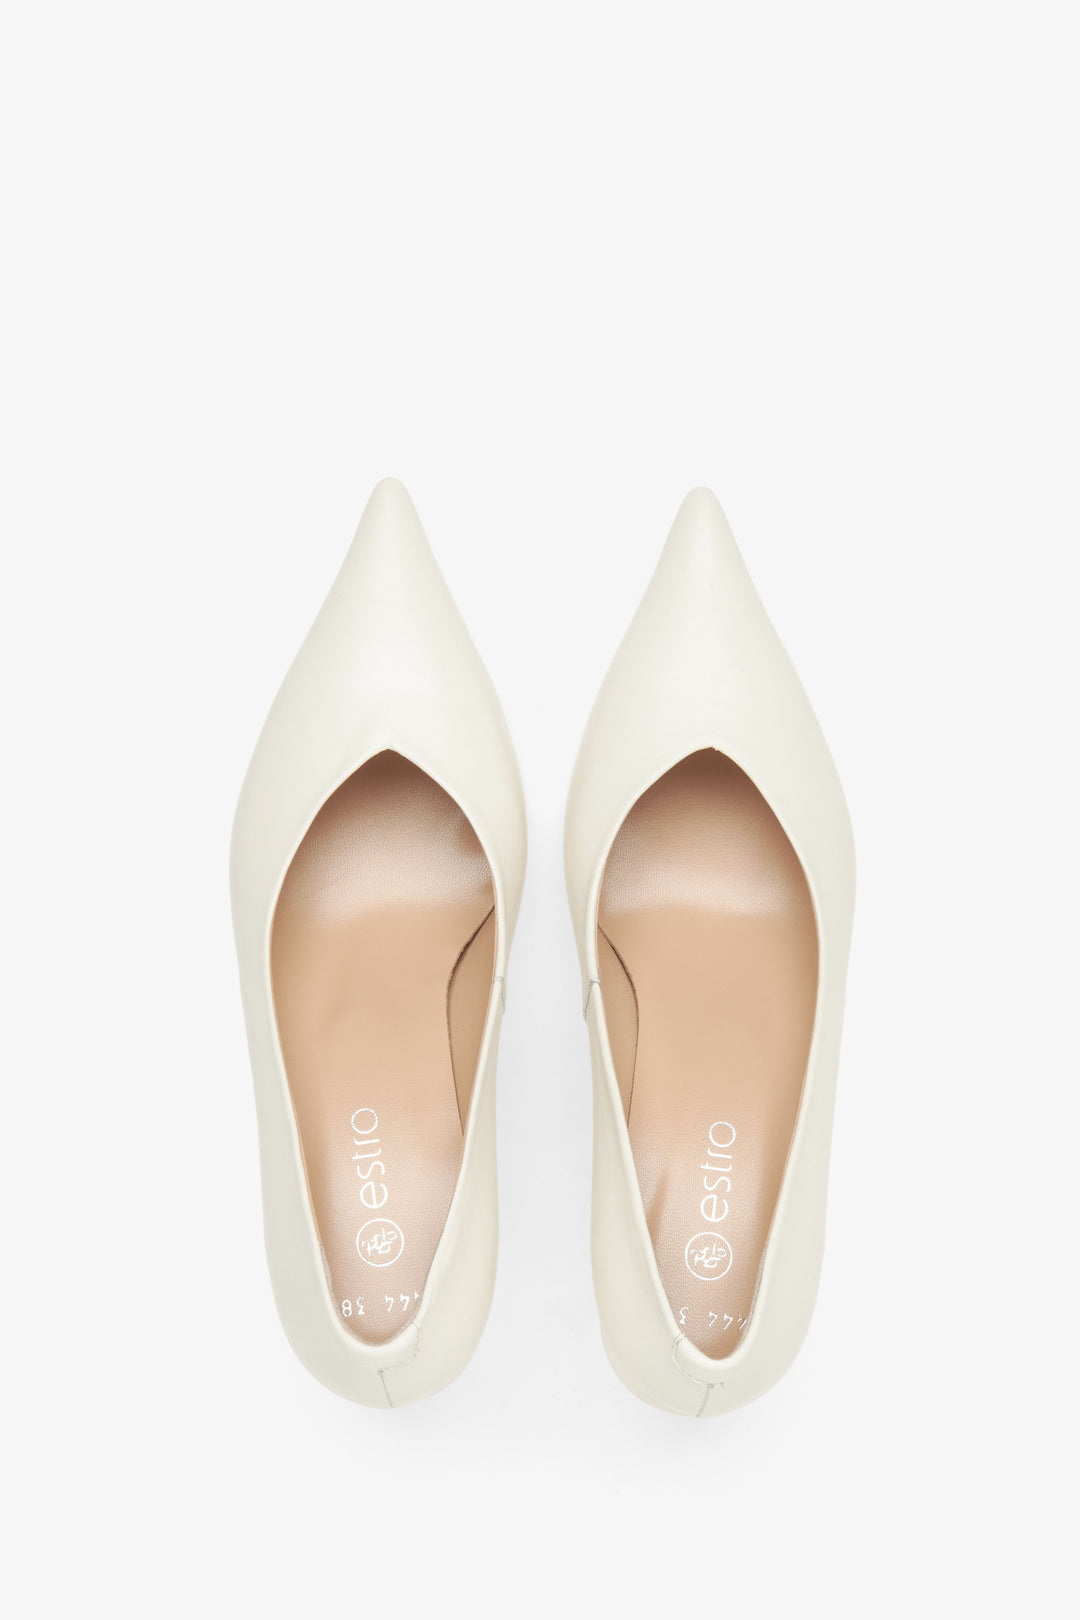 Leather cream-beige women's pumps by Estro - top view presentation of the model